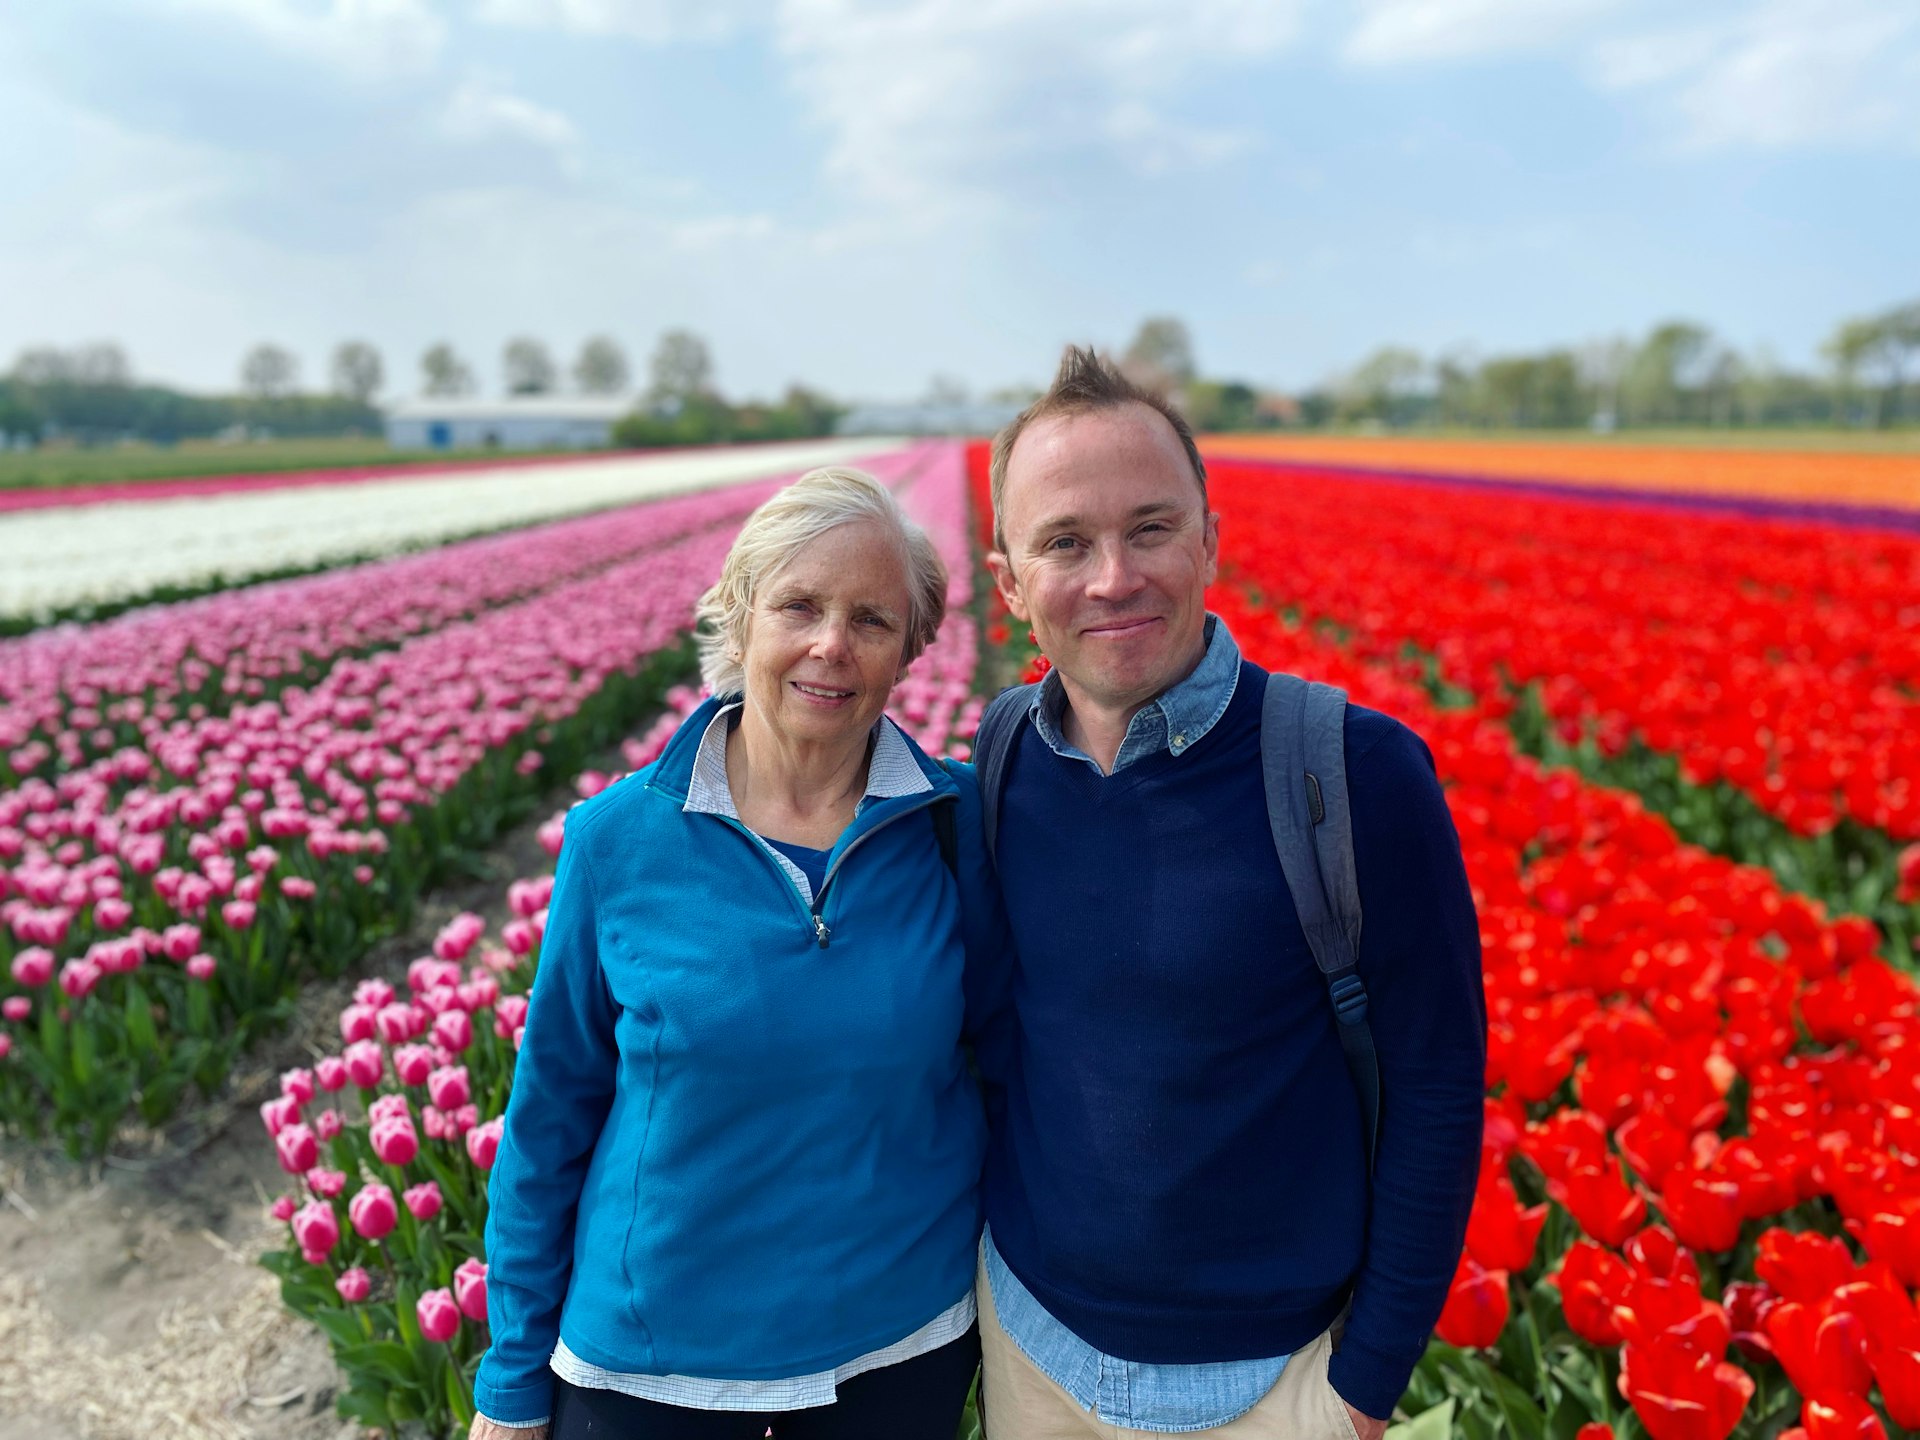 A man and woman pose in front of carefully planted rows of blooming tulips, Bollenstreek, Holland, the Netherlands